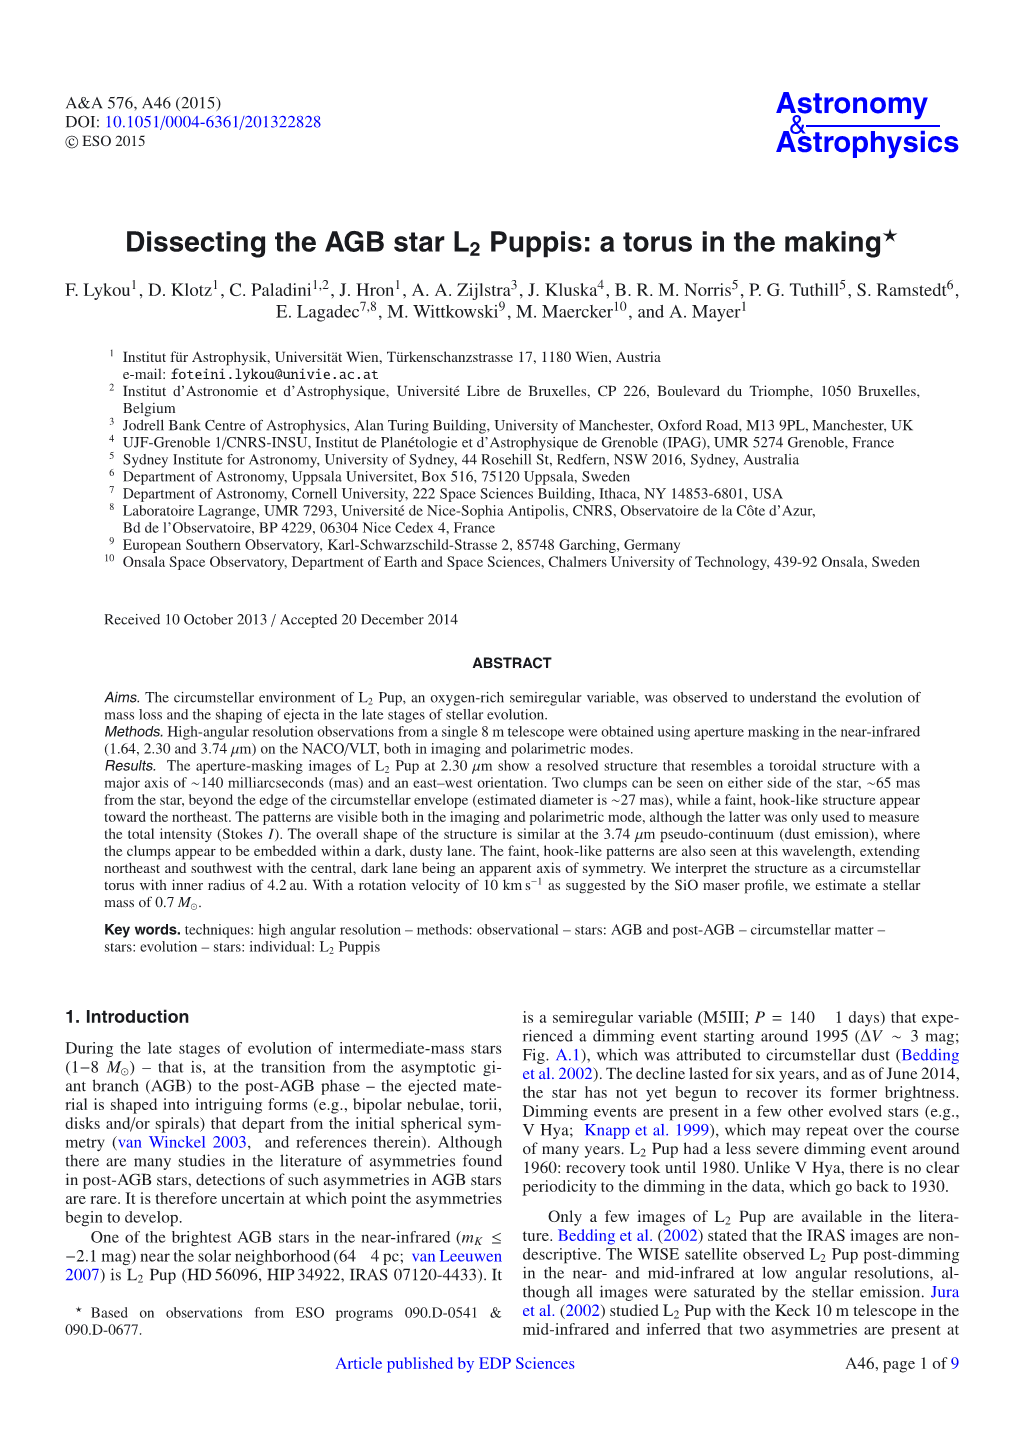 Dissecting the AGB Star L2 Puppis: a Torus in the Making